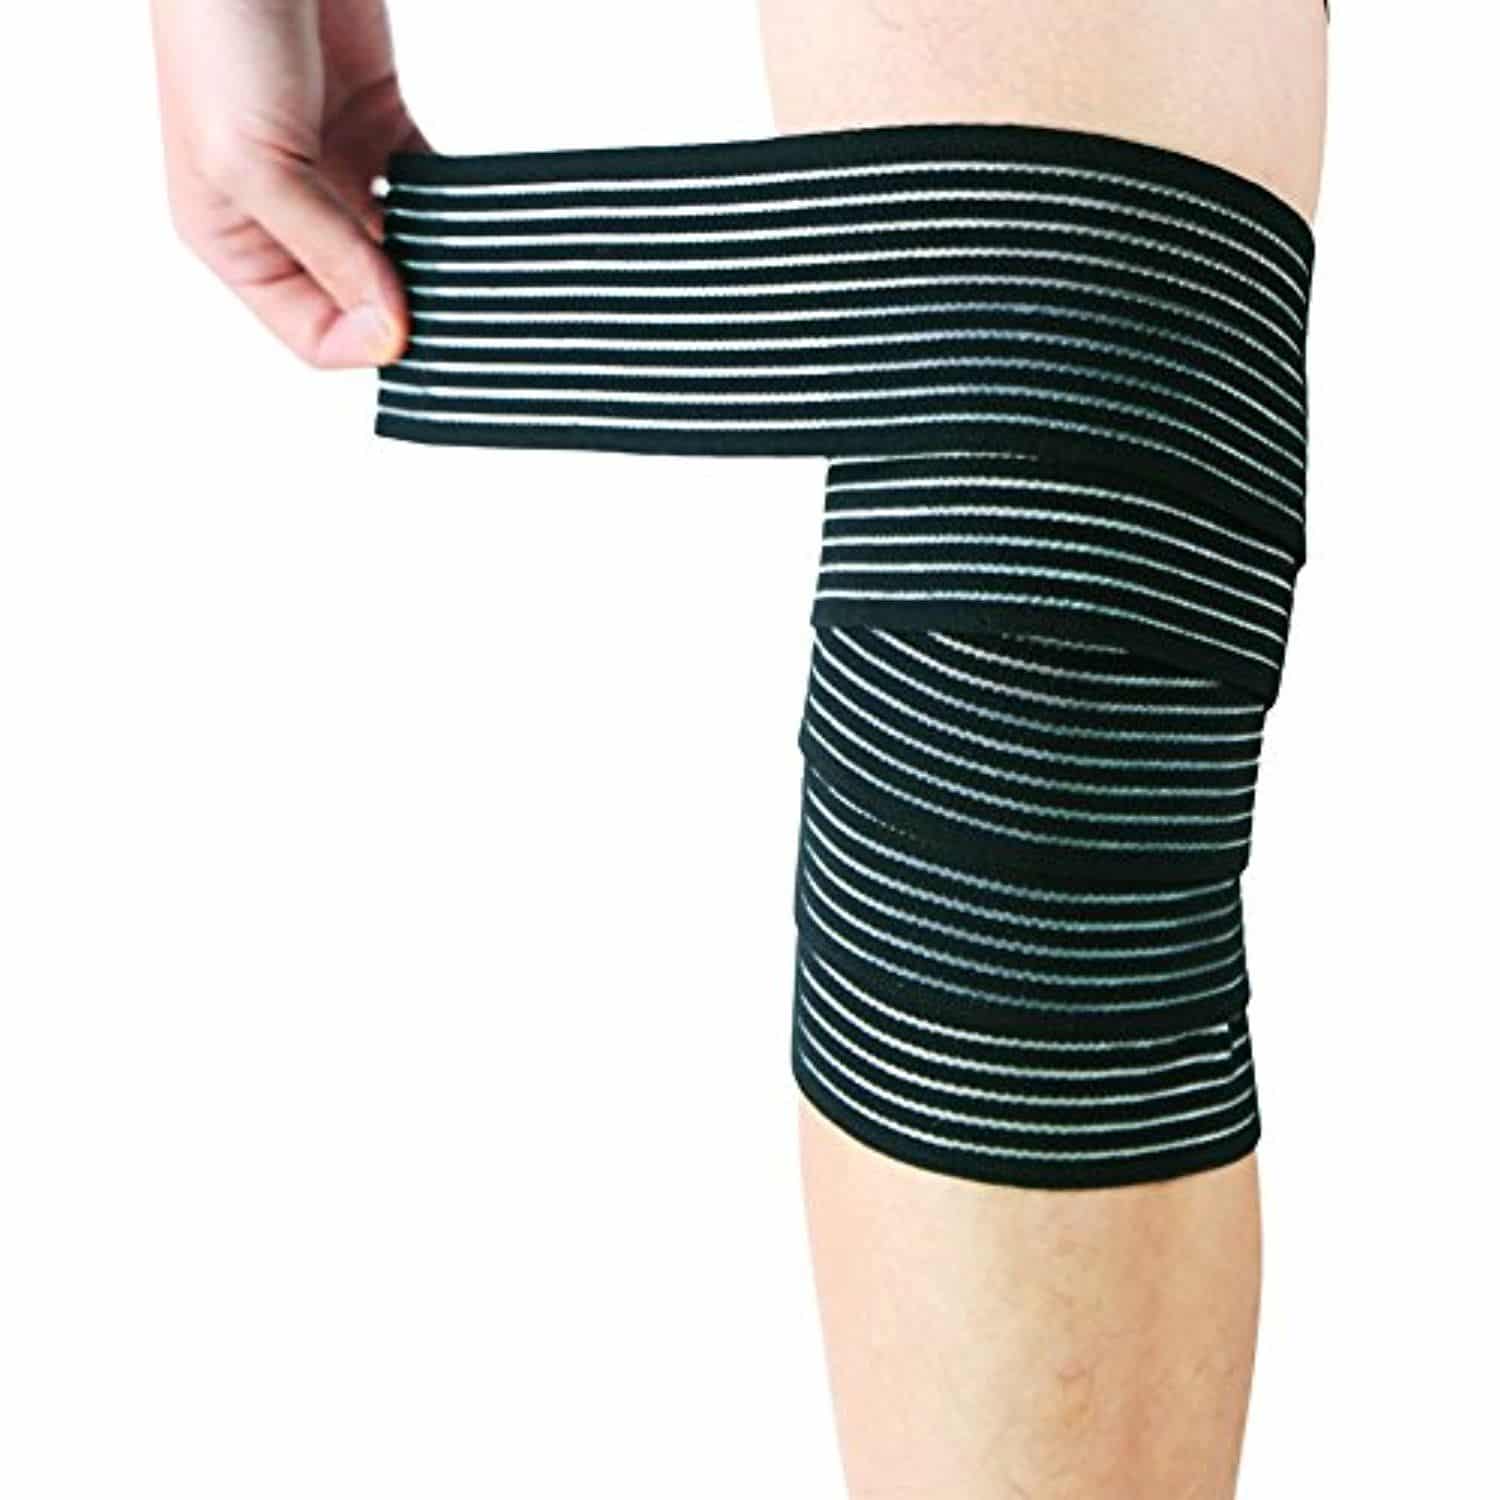 How To Wrap Knee With Ace Bandage